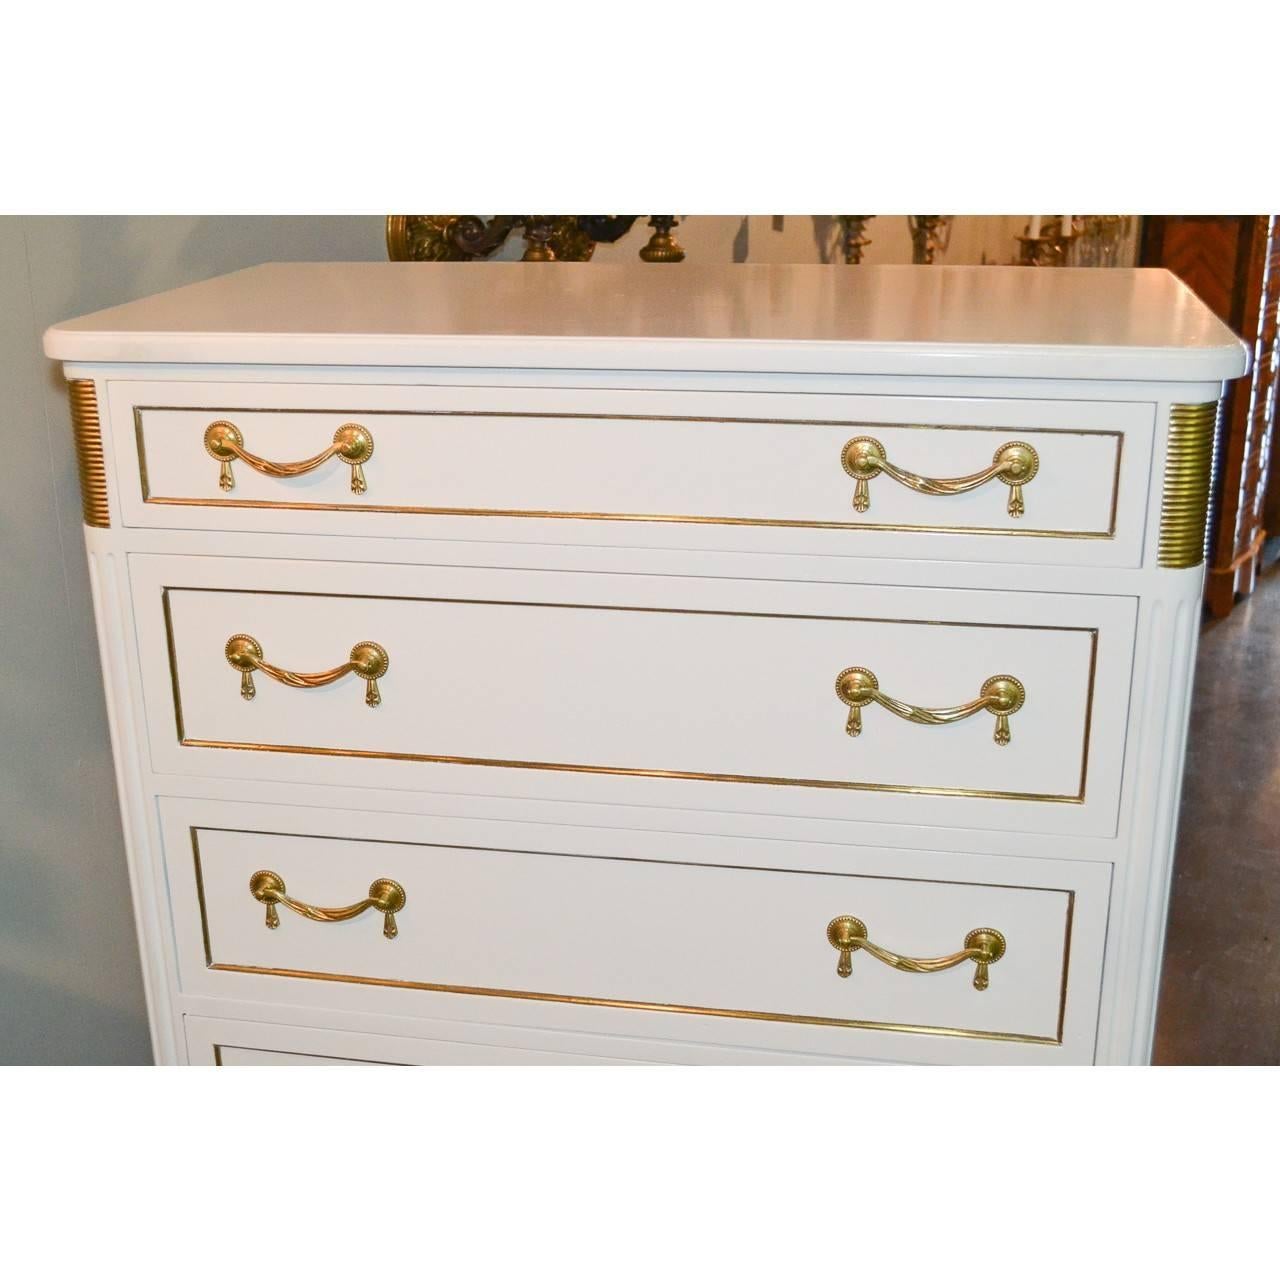 Lovely and elegant Jansen Directoire style white lacquered lingerie chest with superb gilt bronze swag and tassel pulls. Wonderful polished bronze accents on the corners and on tapered legs.

Great focal piece. Will mix well with antique,